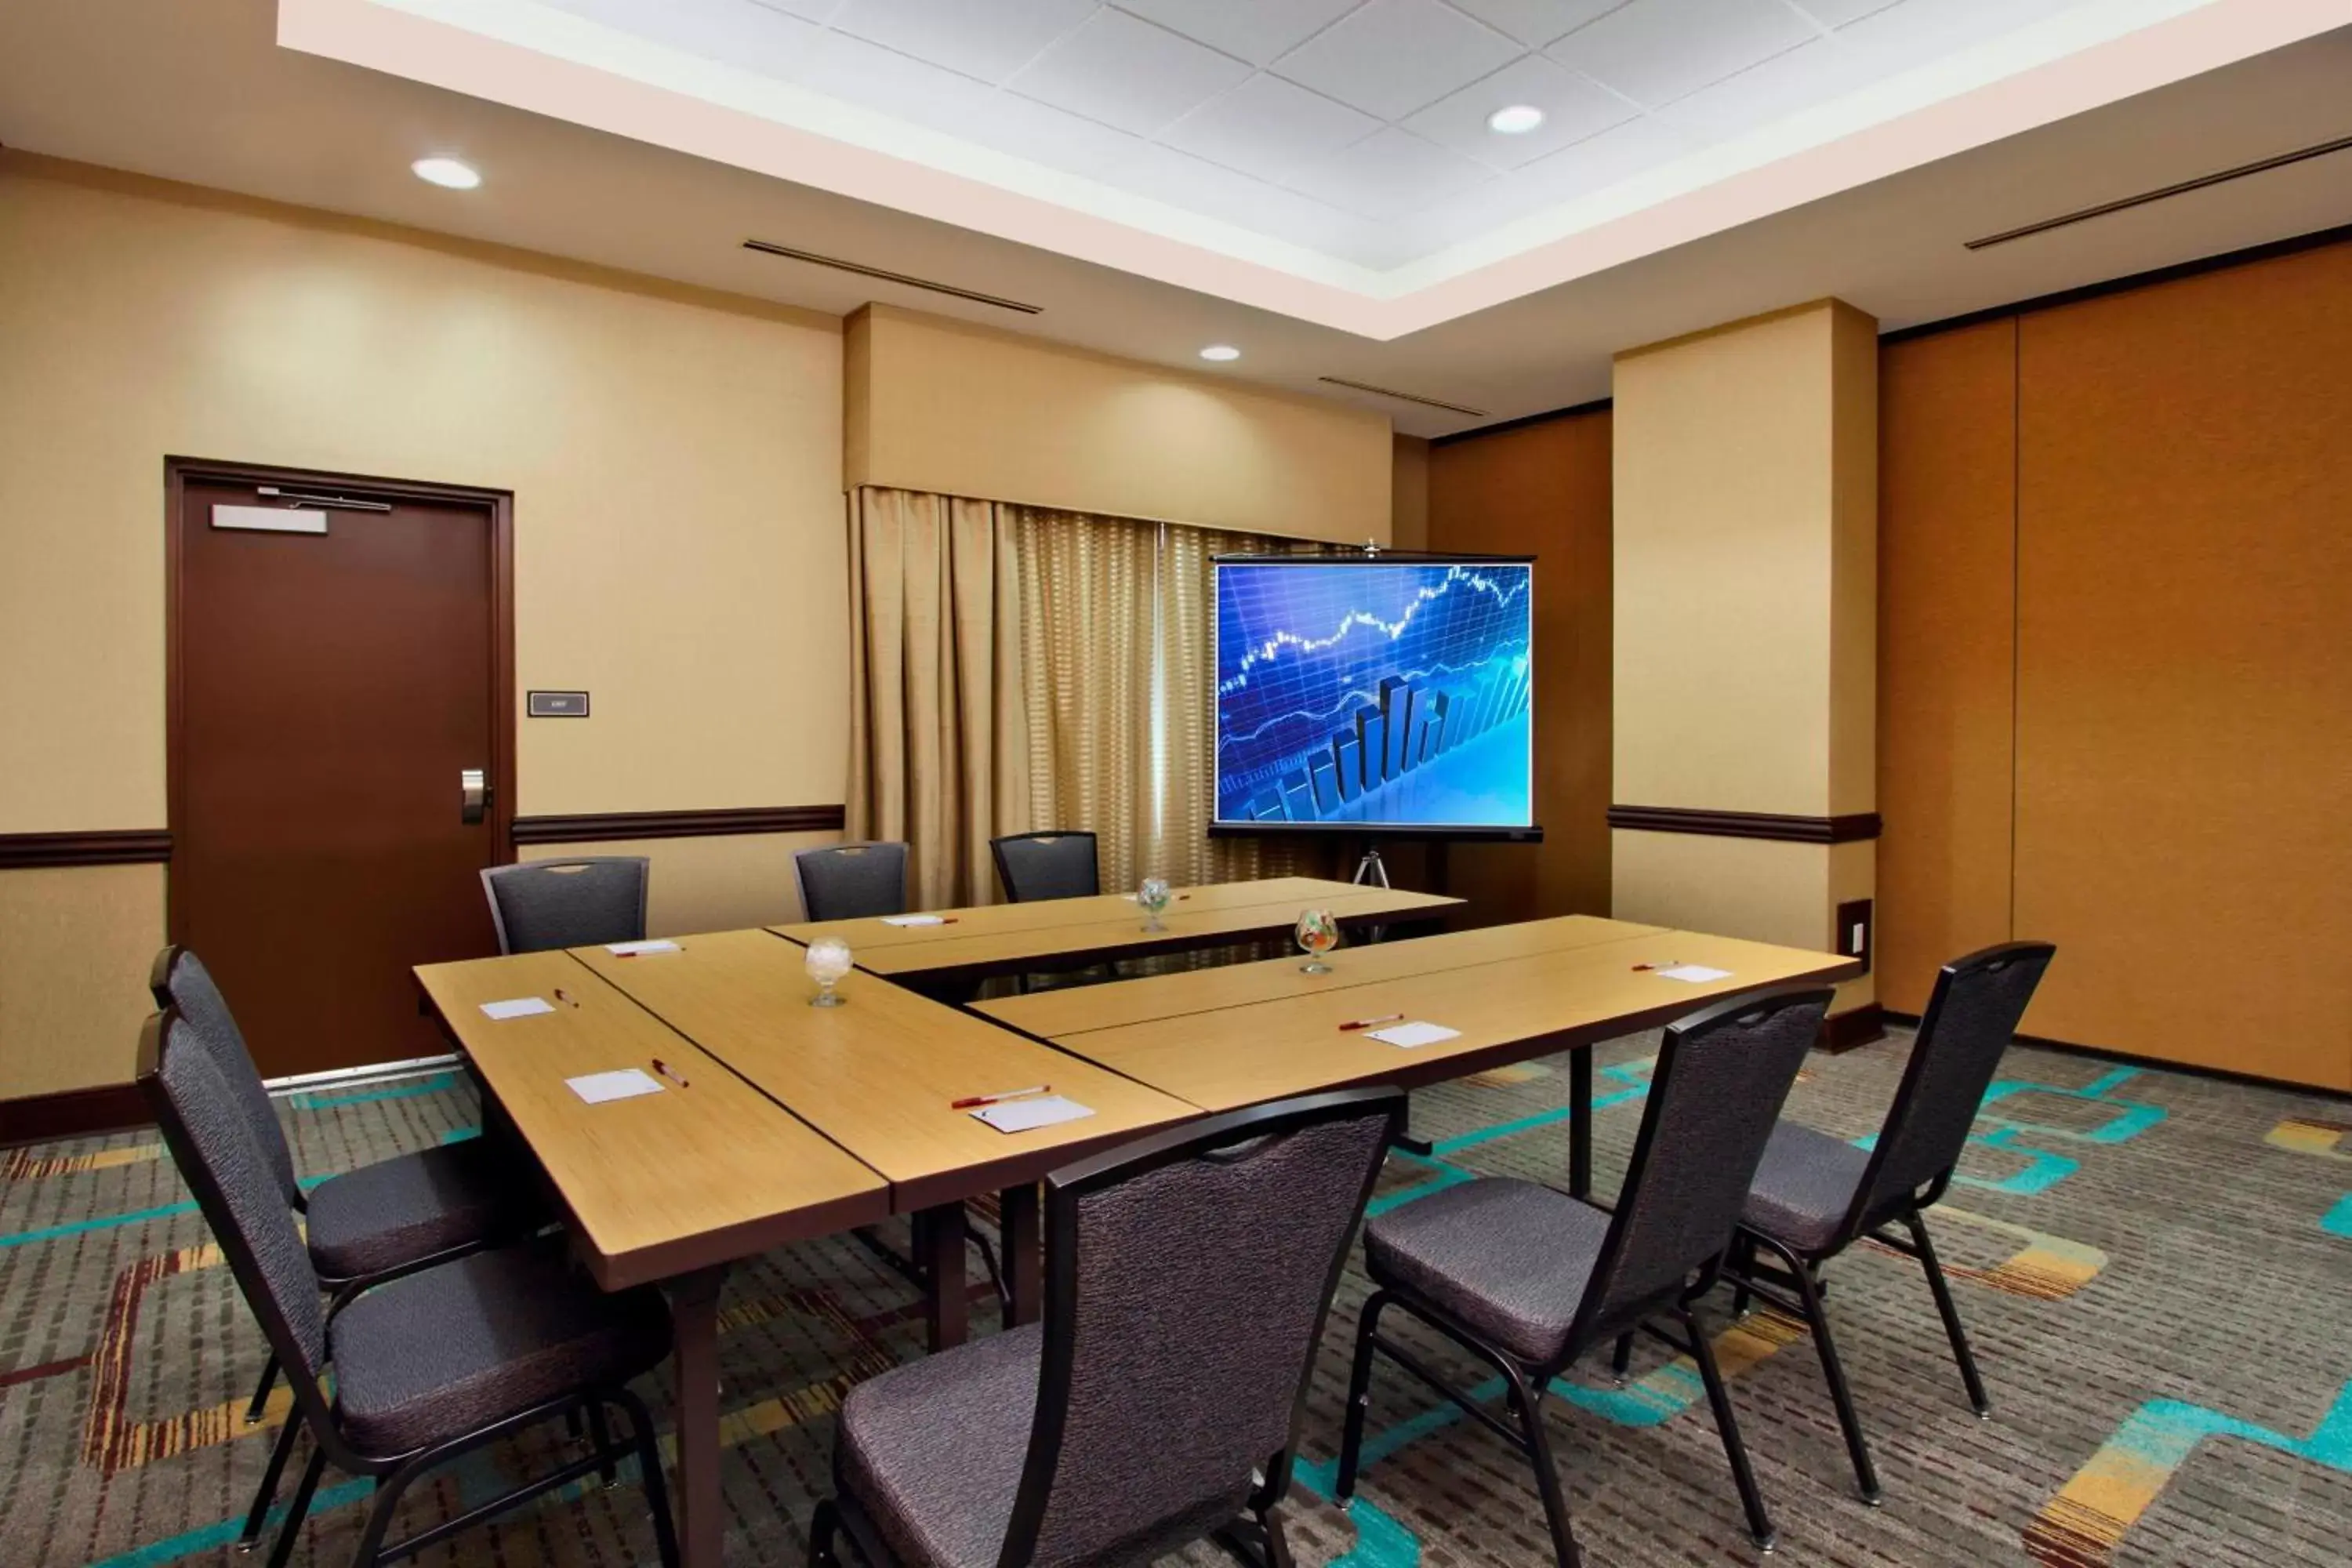 Meeting/conference room in Residence Inn DFW Airport North/Grapevine